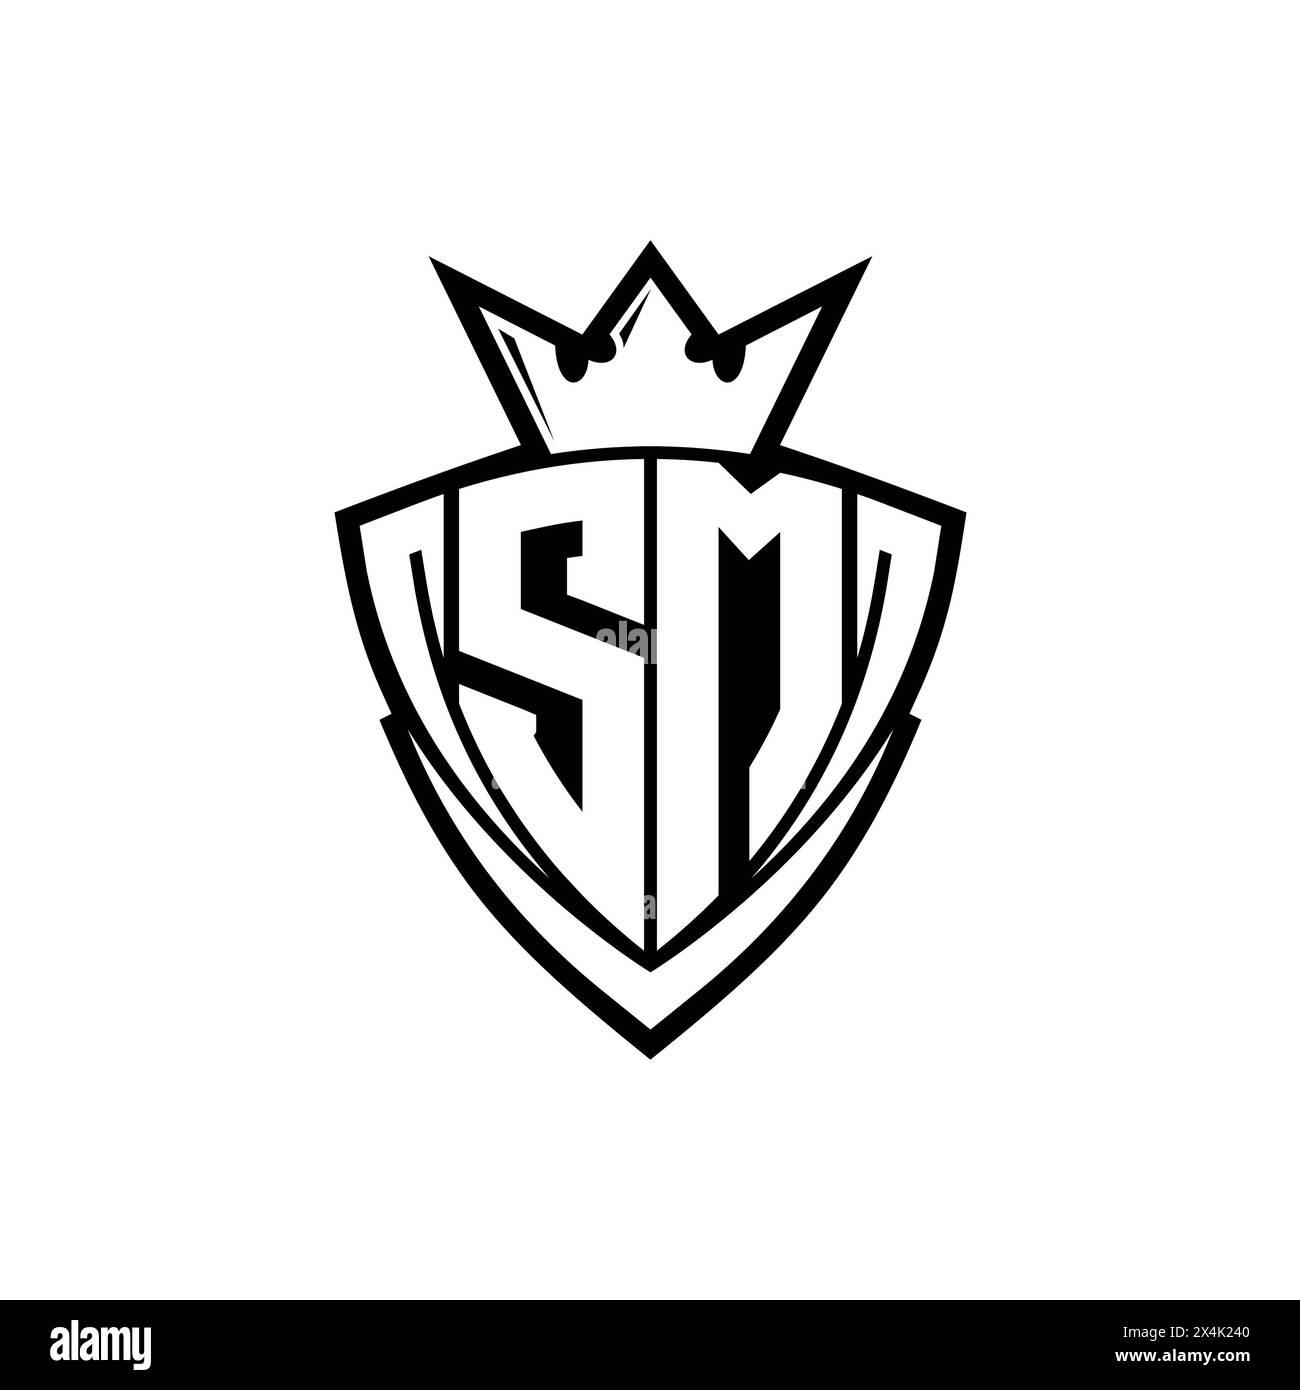 SM Bold letter logo with sharp triangle shield shape with crown inside white outline on white background template design Stock Photo